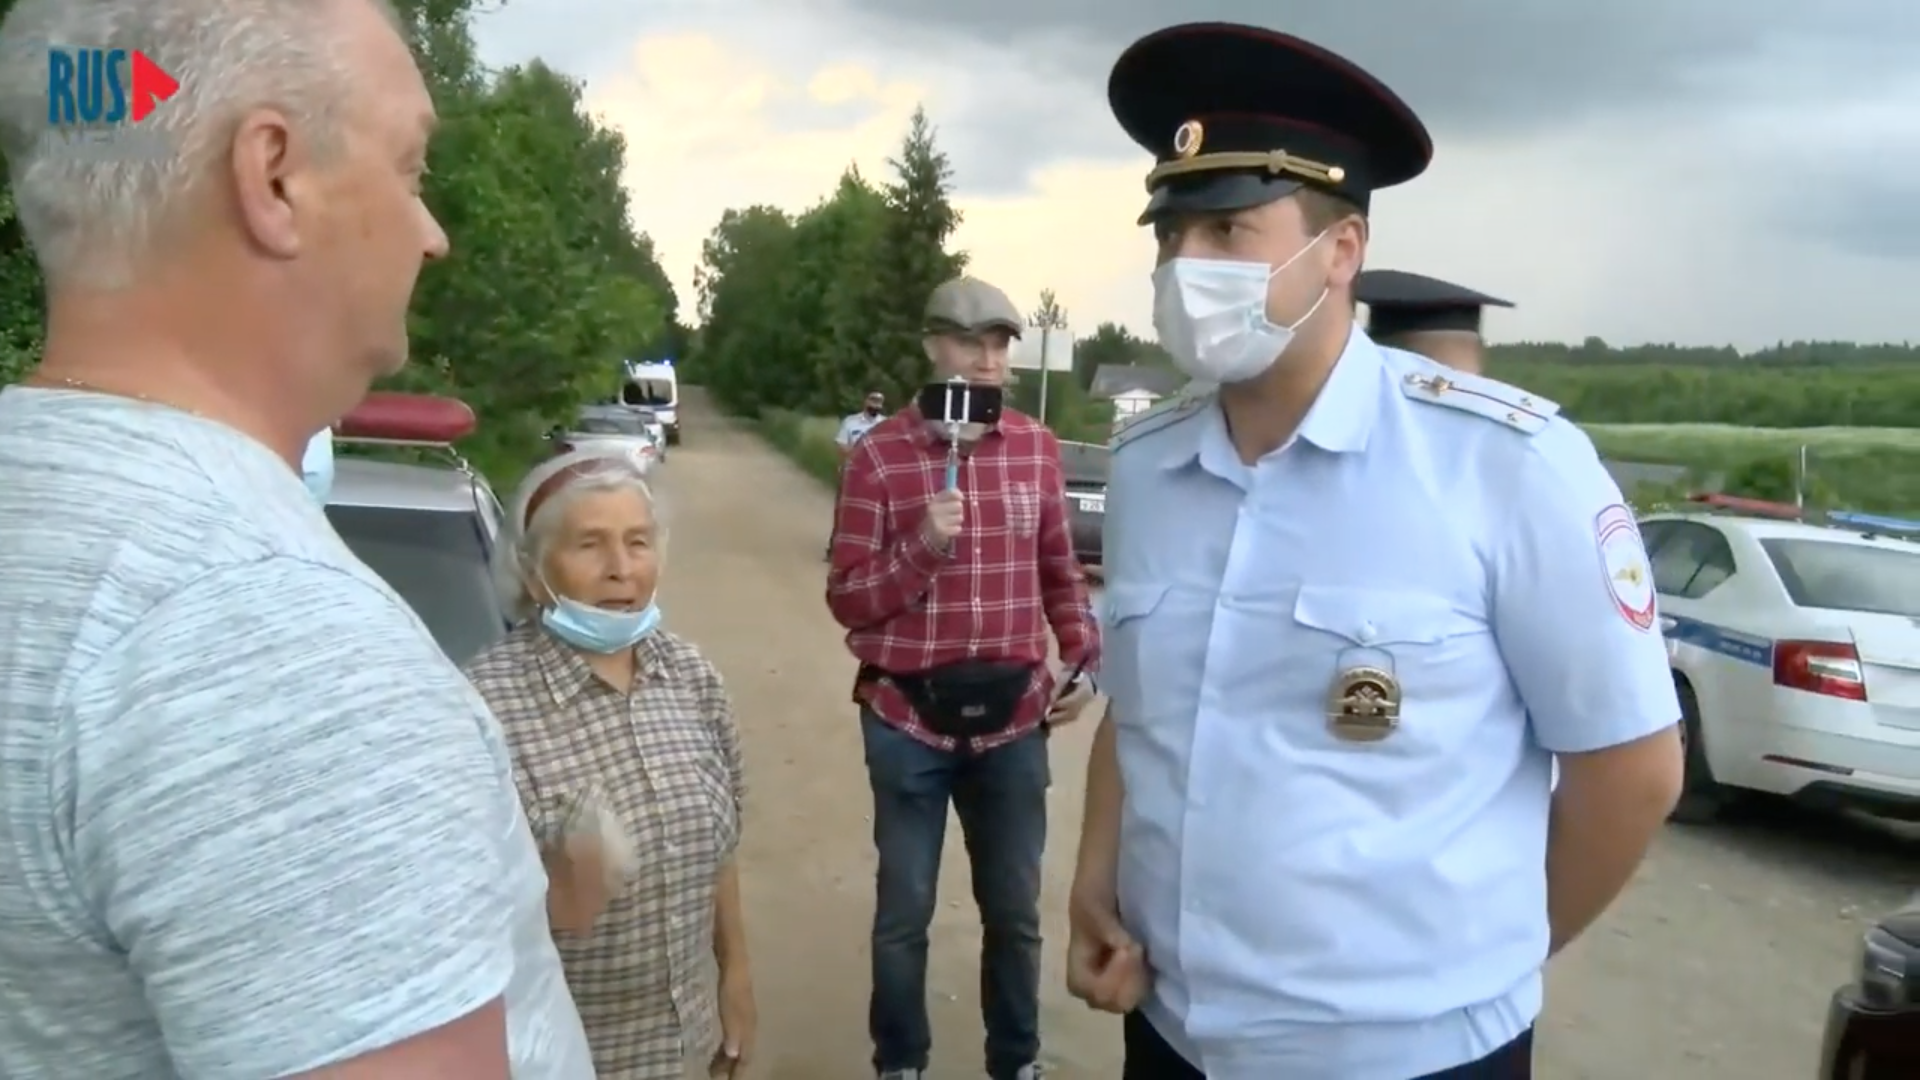 In Khrabrovo, near Moscow, police dealt with participants in the rally on Memorial Day